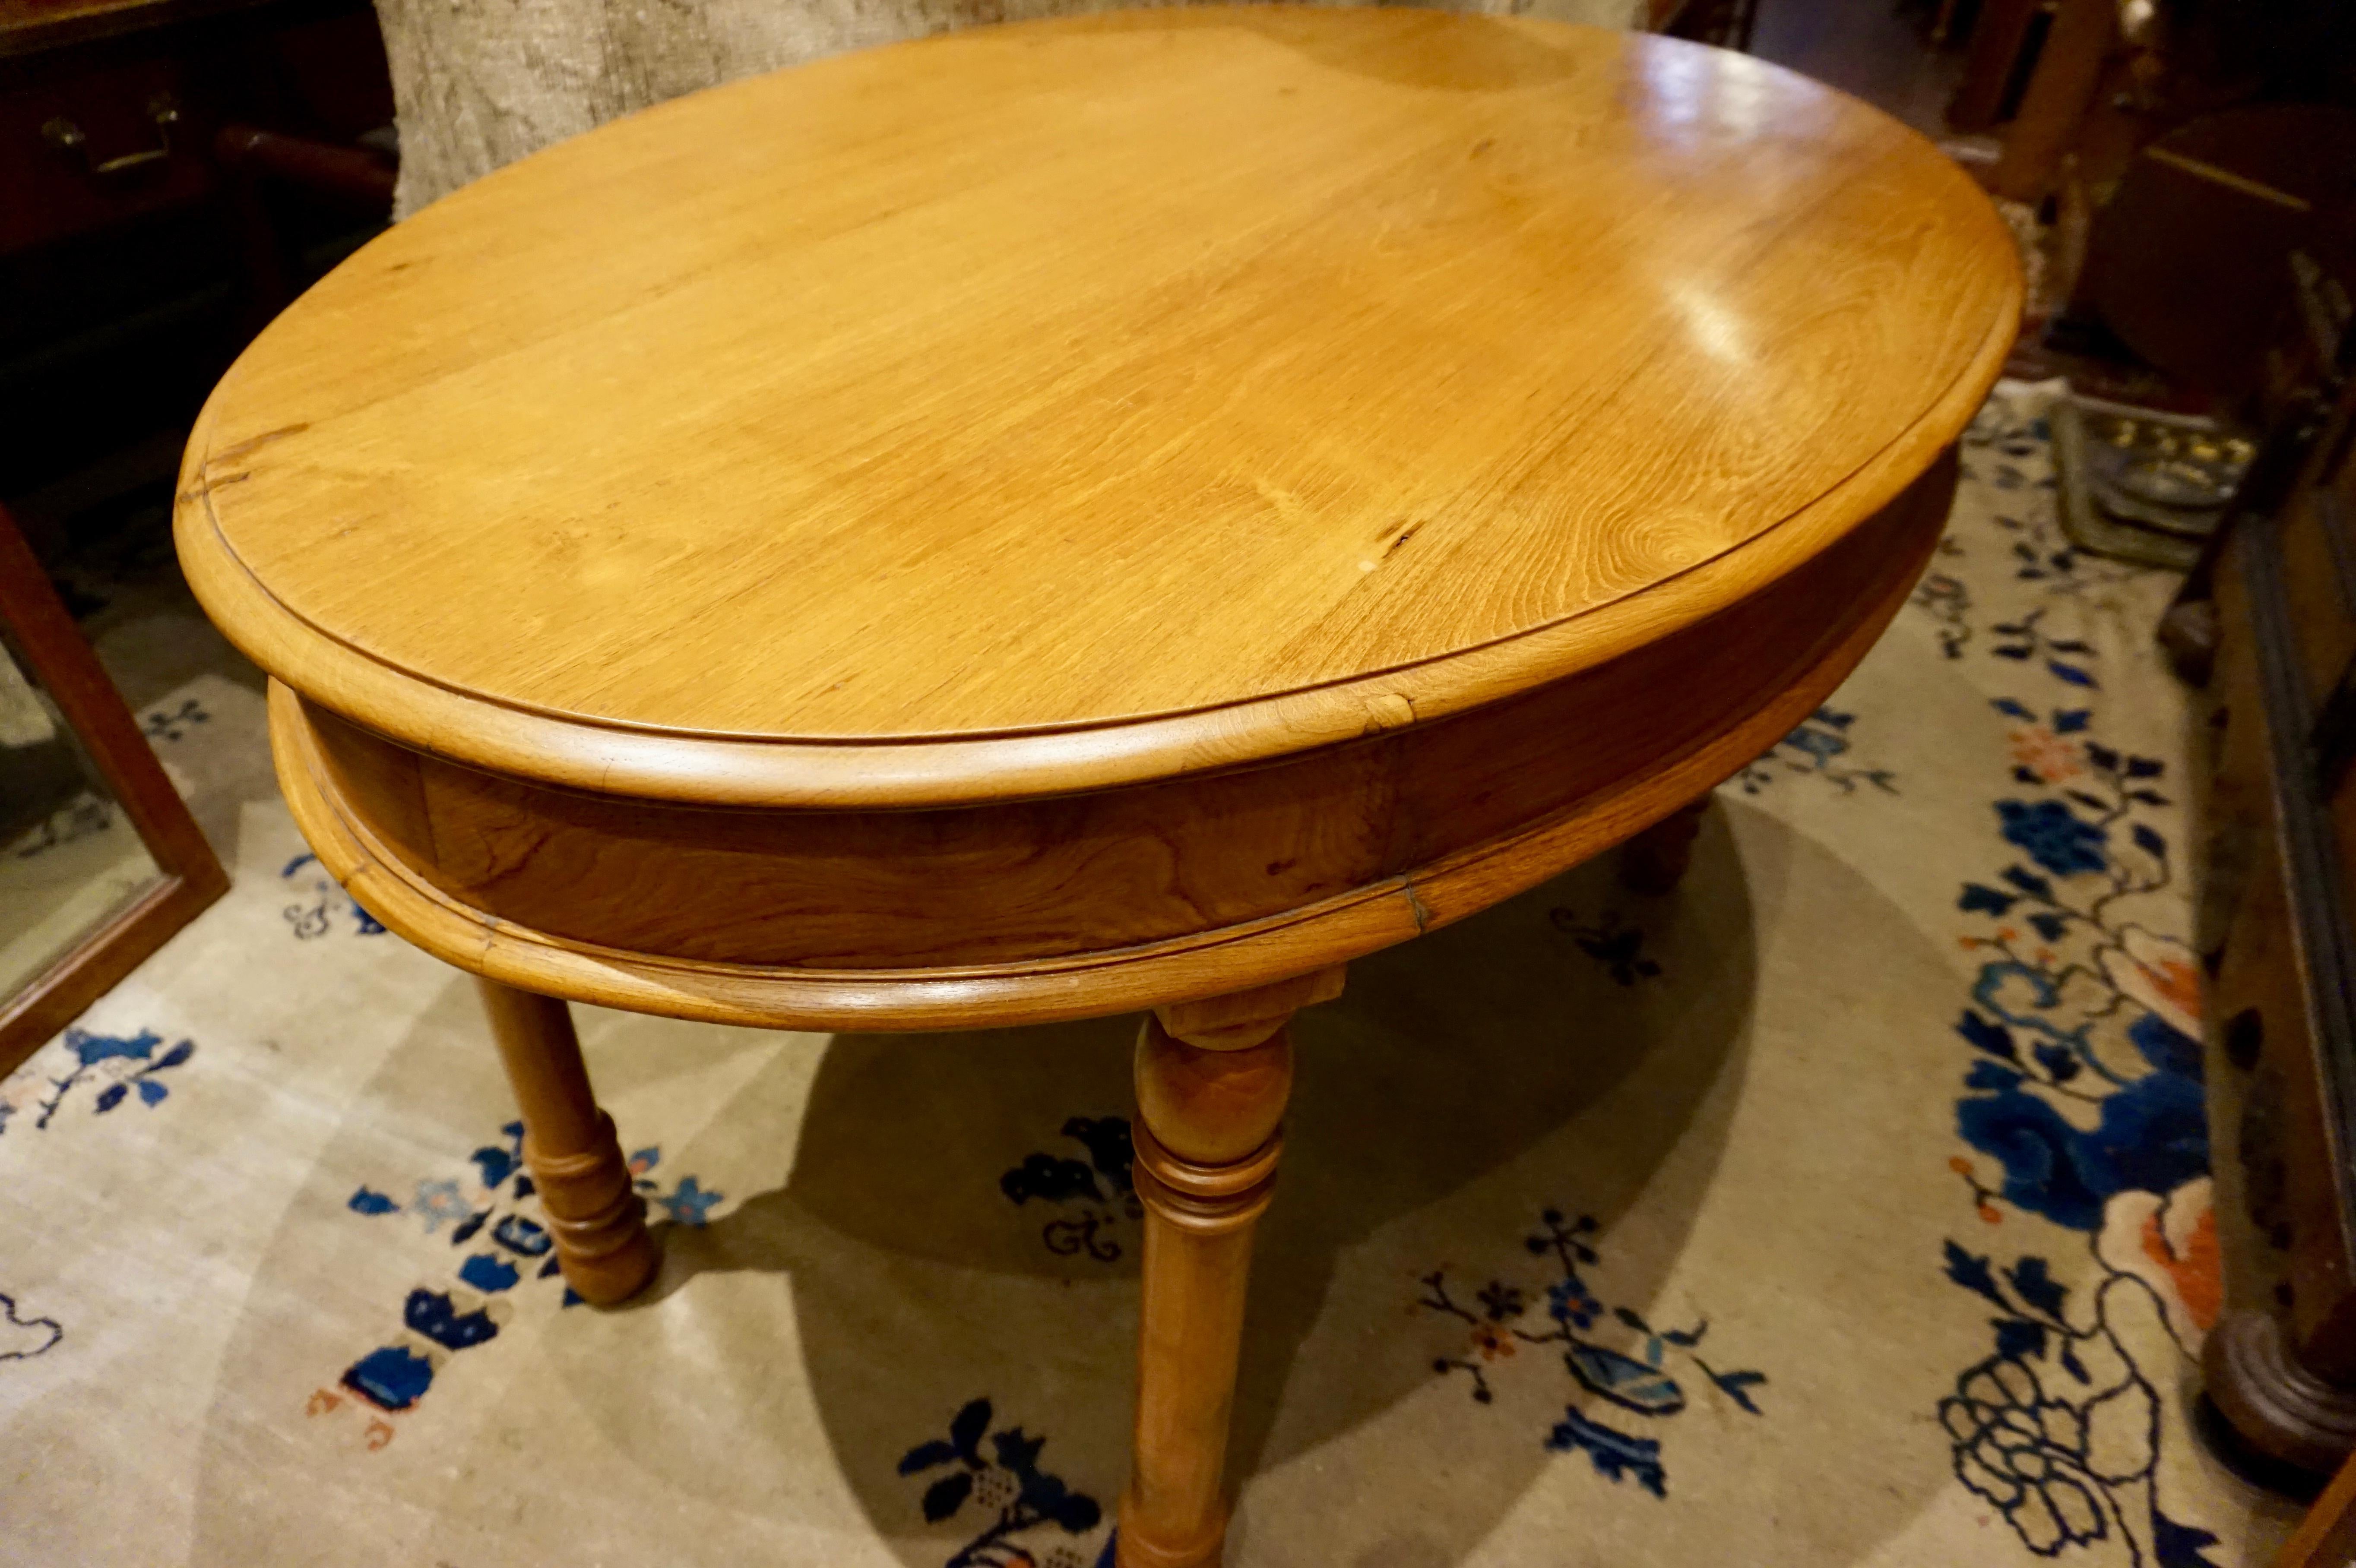 Colonial teak oval dining table/desk. Circa 1890's.
Solid teak Colonial table uncompromisingly constructed from old growth wood with long flowing grains and unique shape yet simple, timeless design. Well preserved and versatile. Exudes warmth. 
